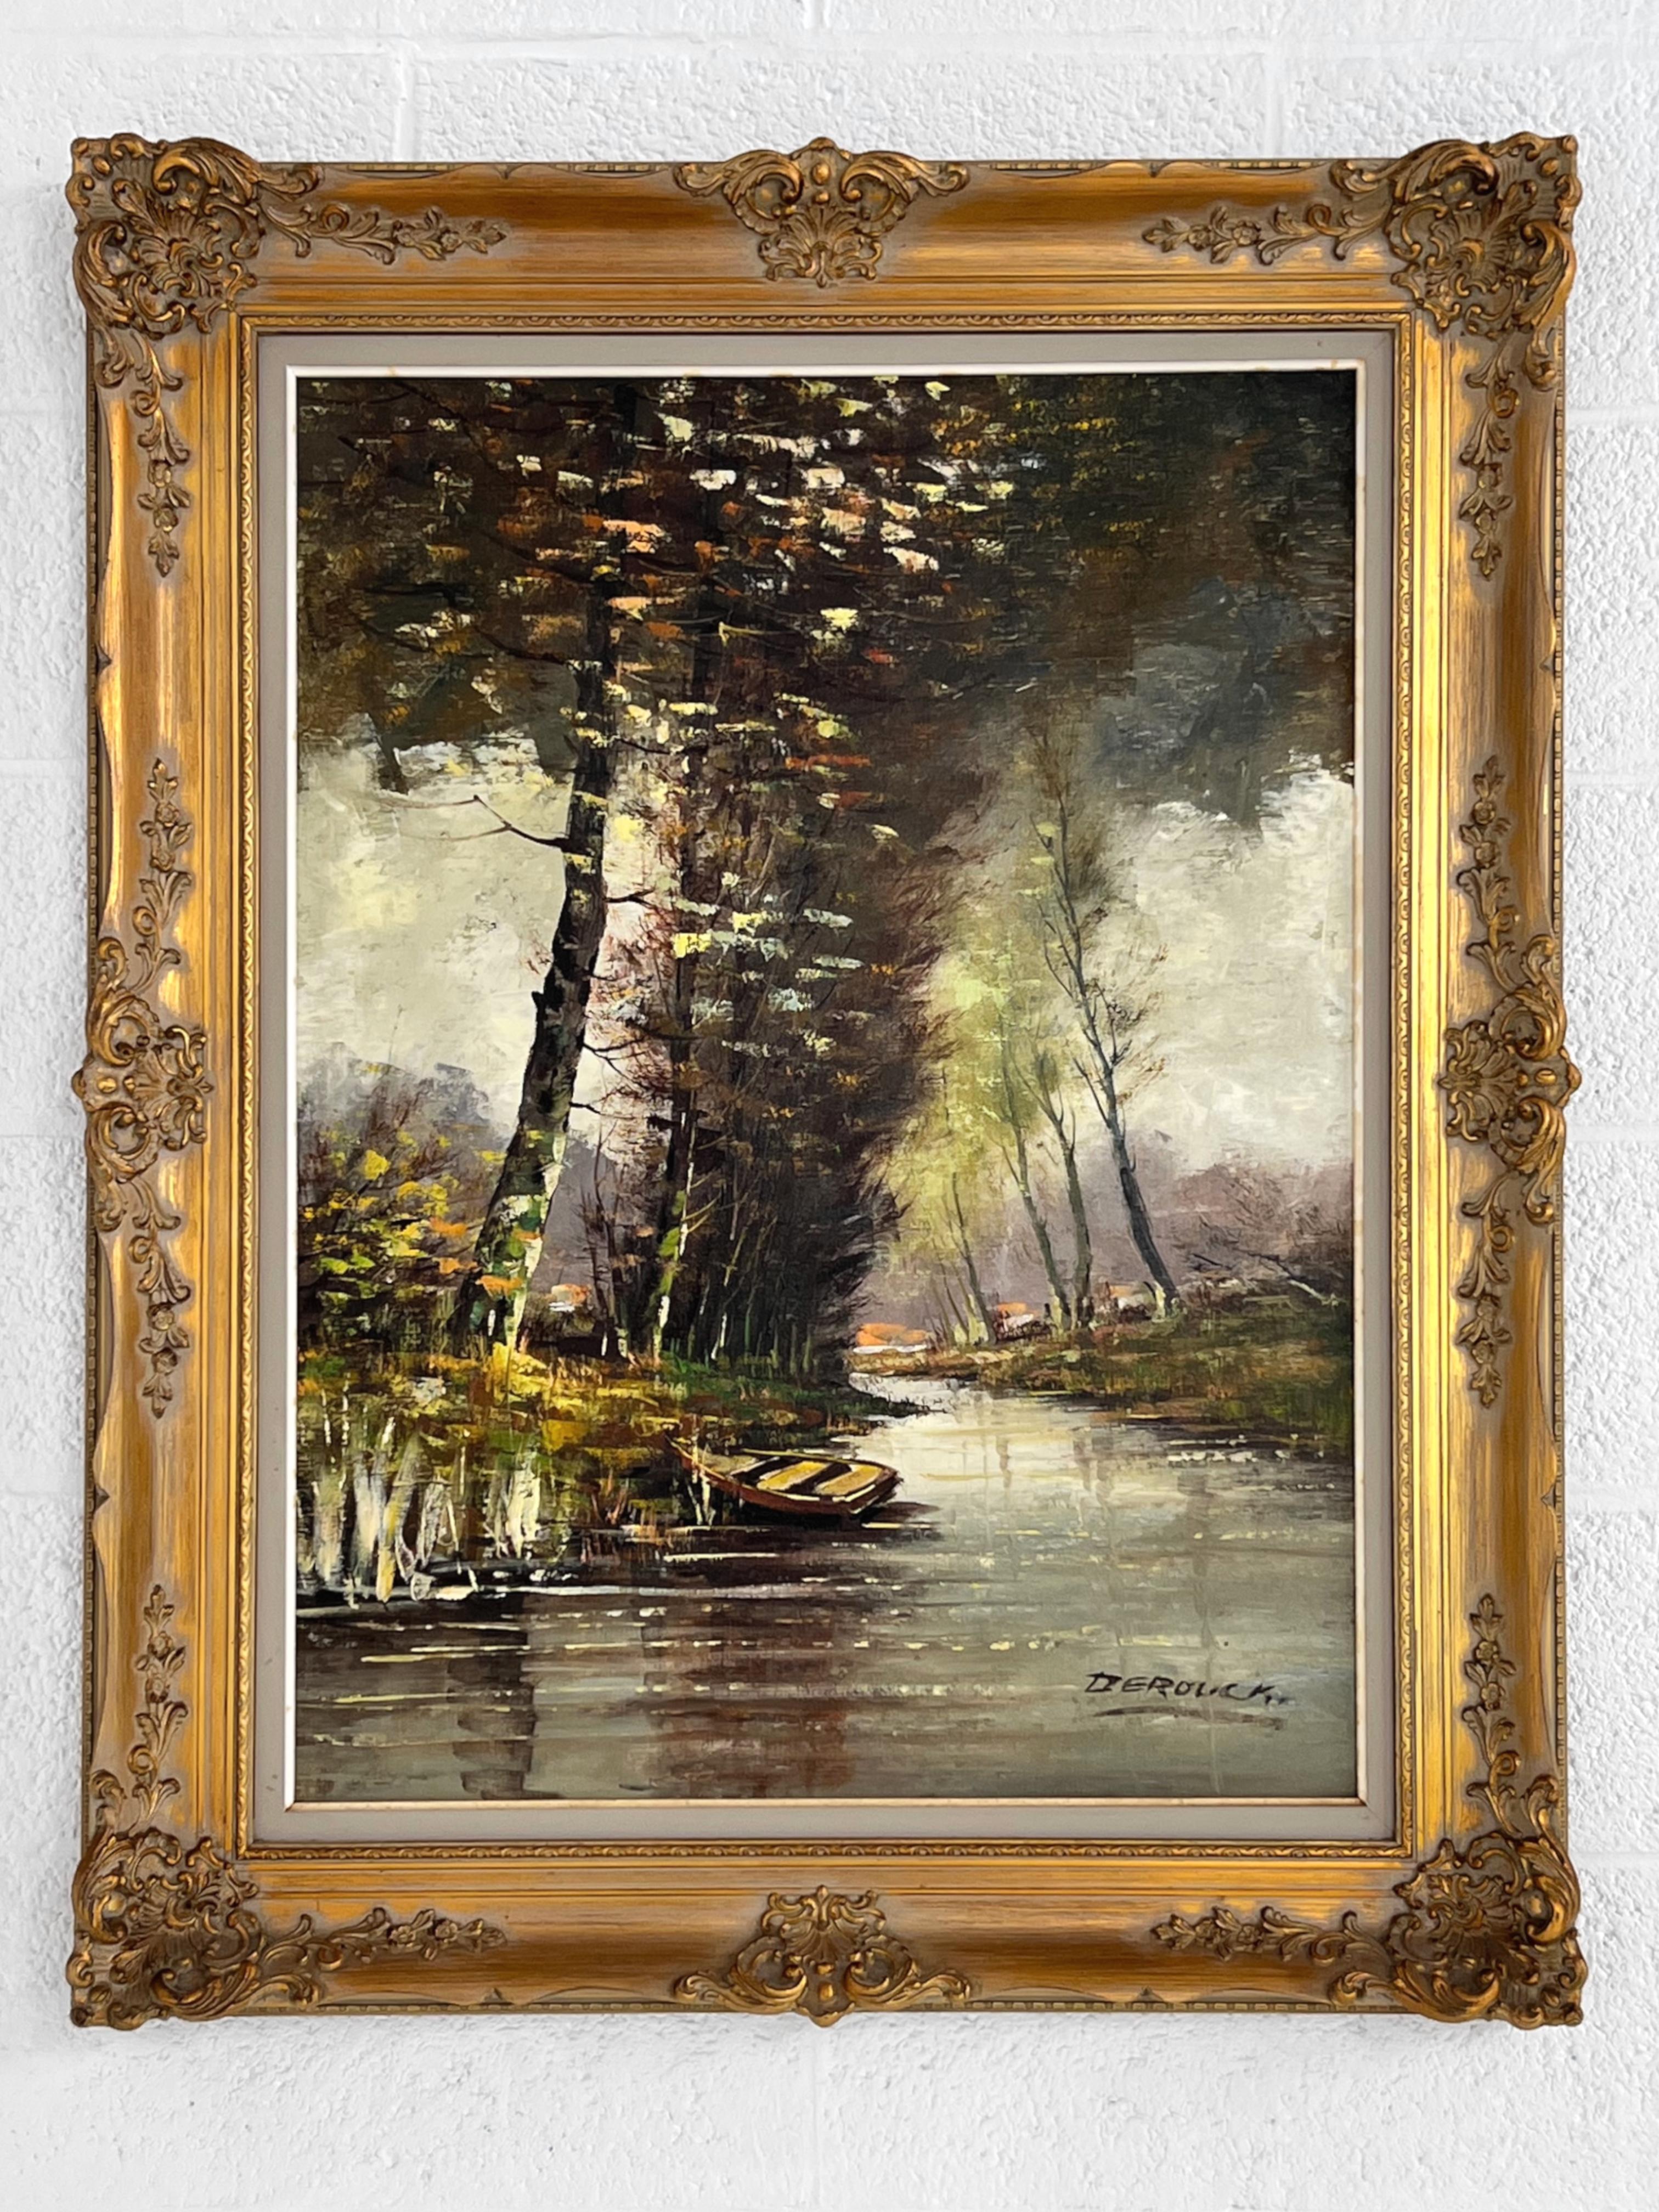 Impressionist Oil Painting River And Nature showing a scene of nature trees and watercourse in front with an adorable village background. All this is perfectly adorned with a beautifully sculpted gilded wooden frame.